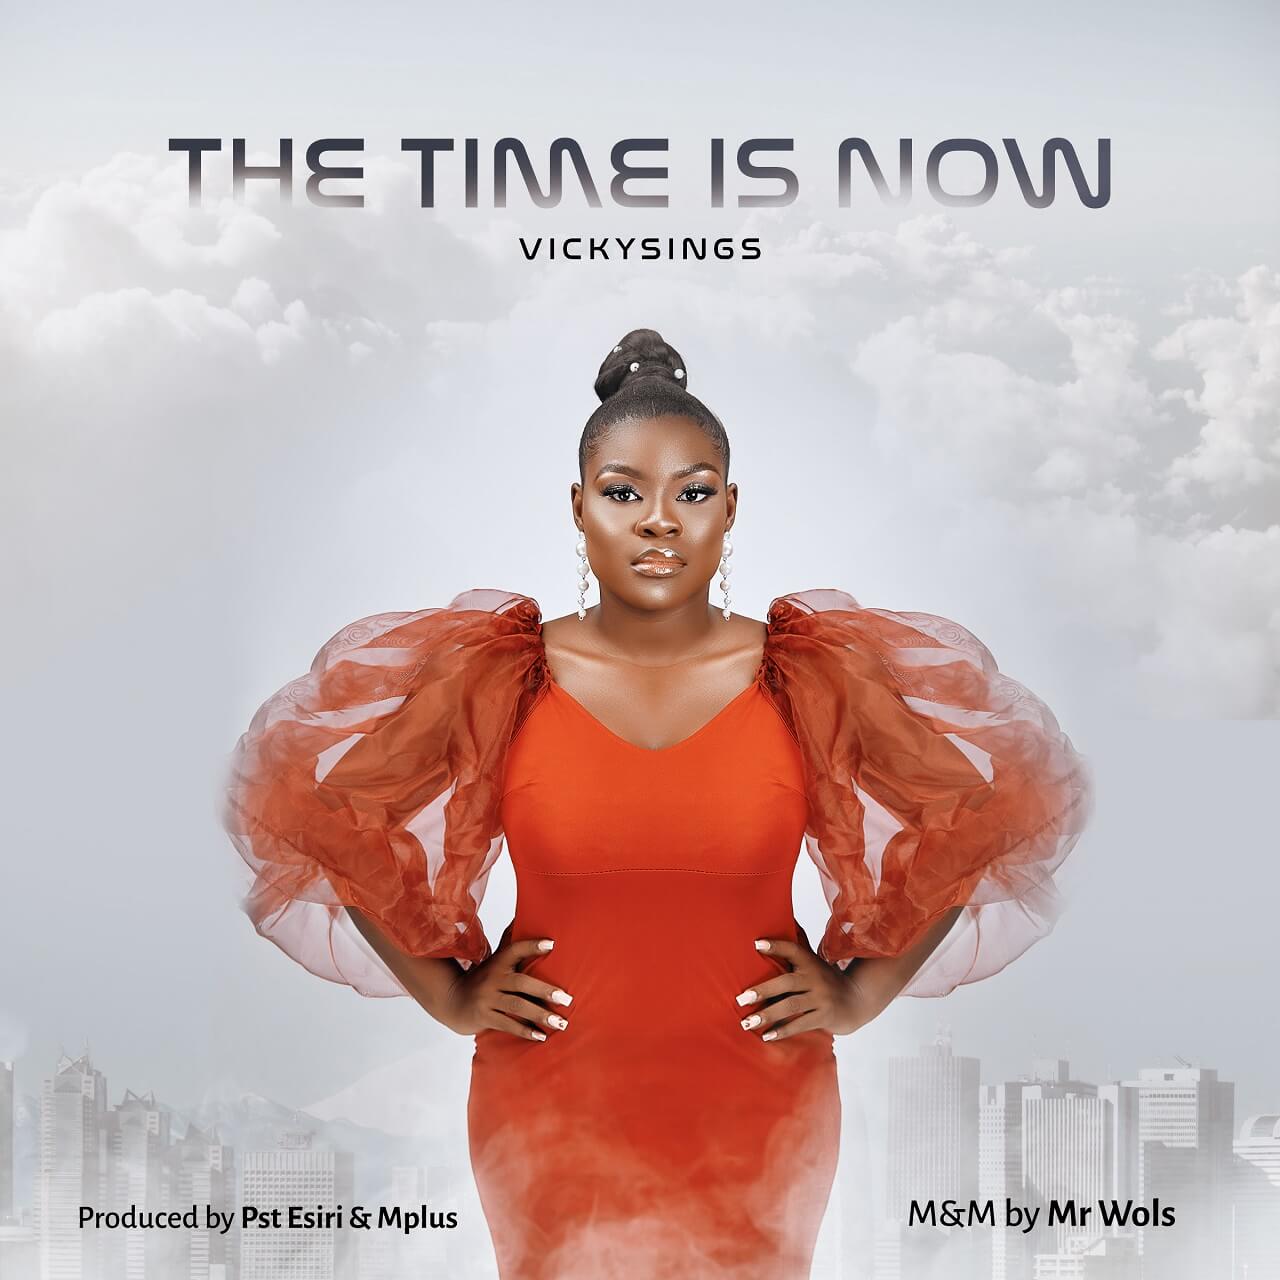 Vickysings Her First Single, Declares “The Time is Now”